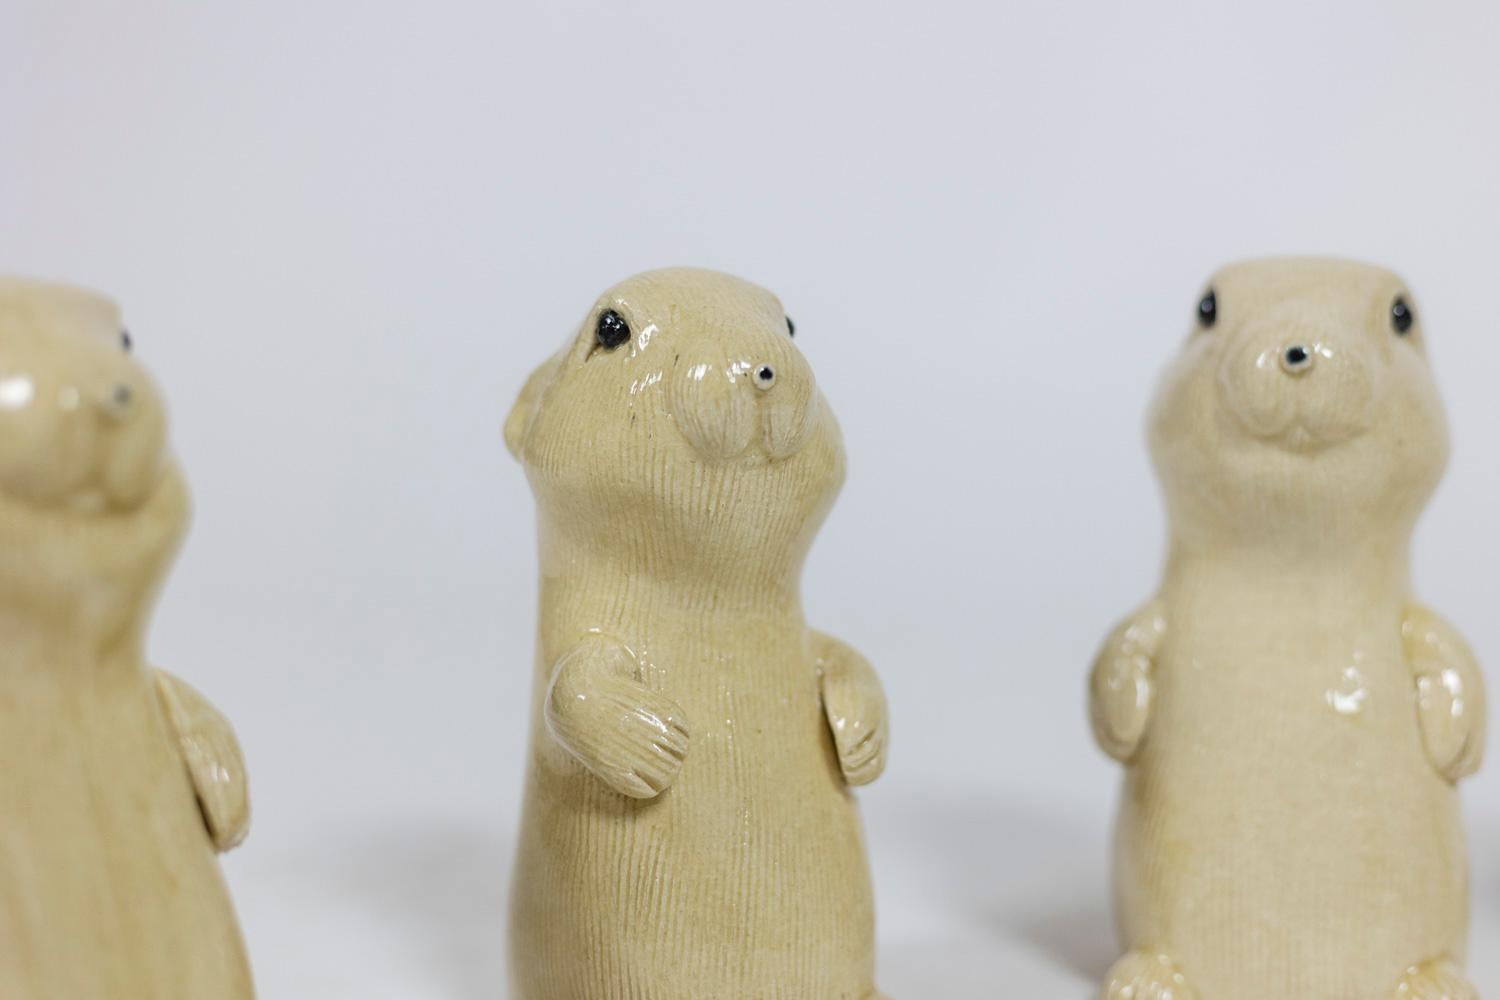 Valerie Couret, signed.

Set of six ceramic prairie dogs, in shades of beige.

Contemporary French craftsmanship.

The price is indicated per unit!